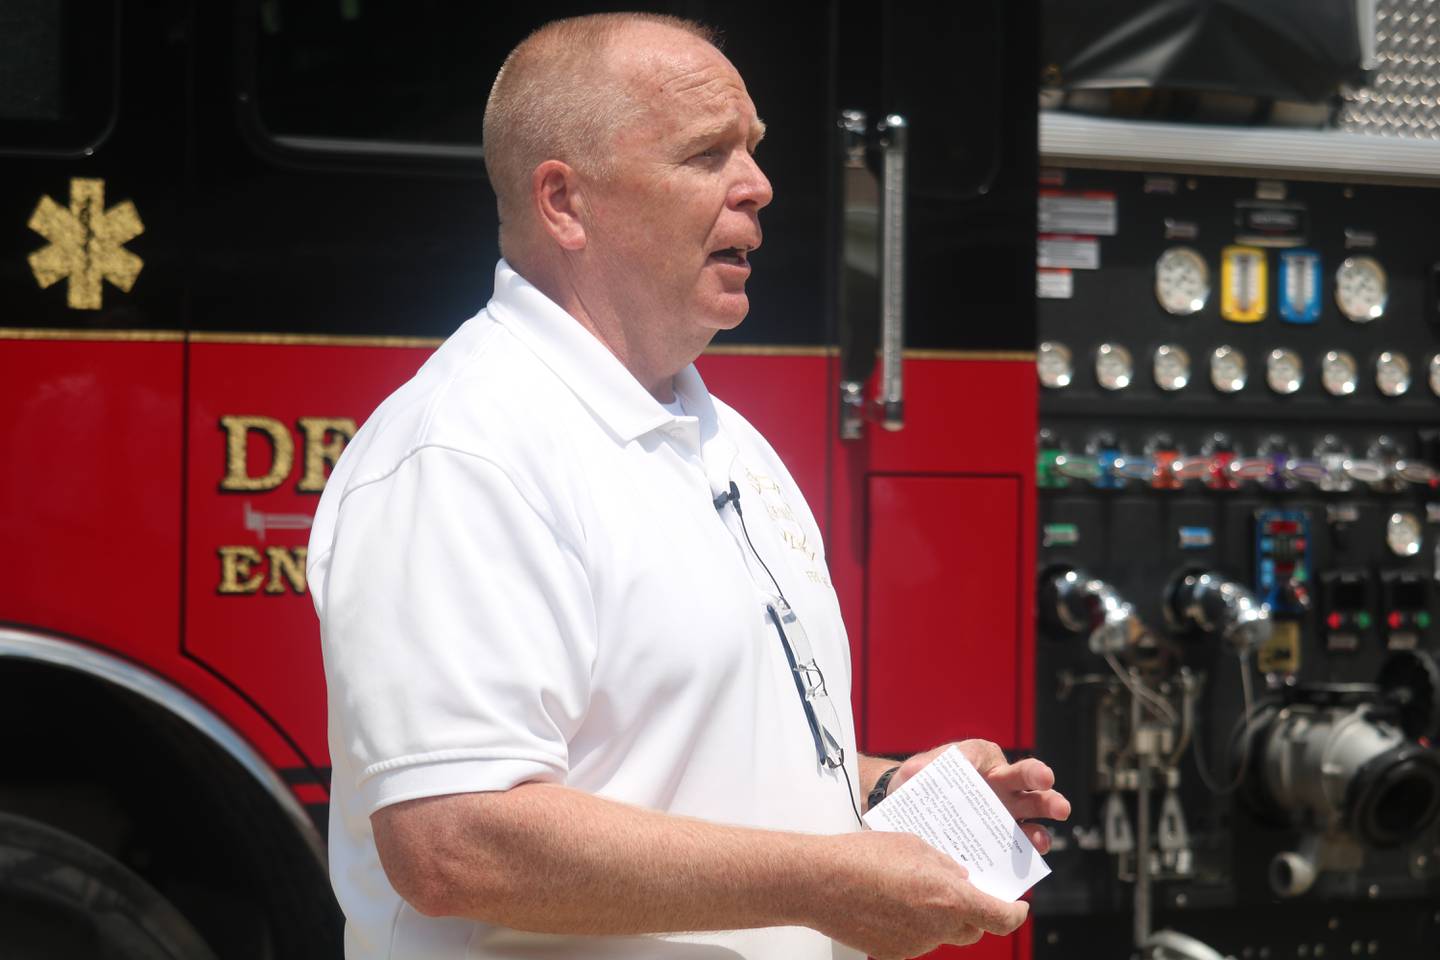 DeKalb Fire Chief Mike Thomas gives remarks Friday, Aug. 4, 2023 during a dedication ceremony for fire engine No. 2 held at fire station No. 2.